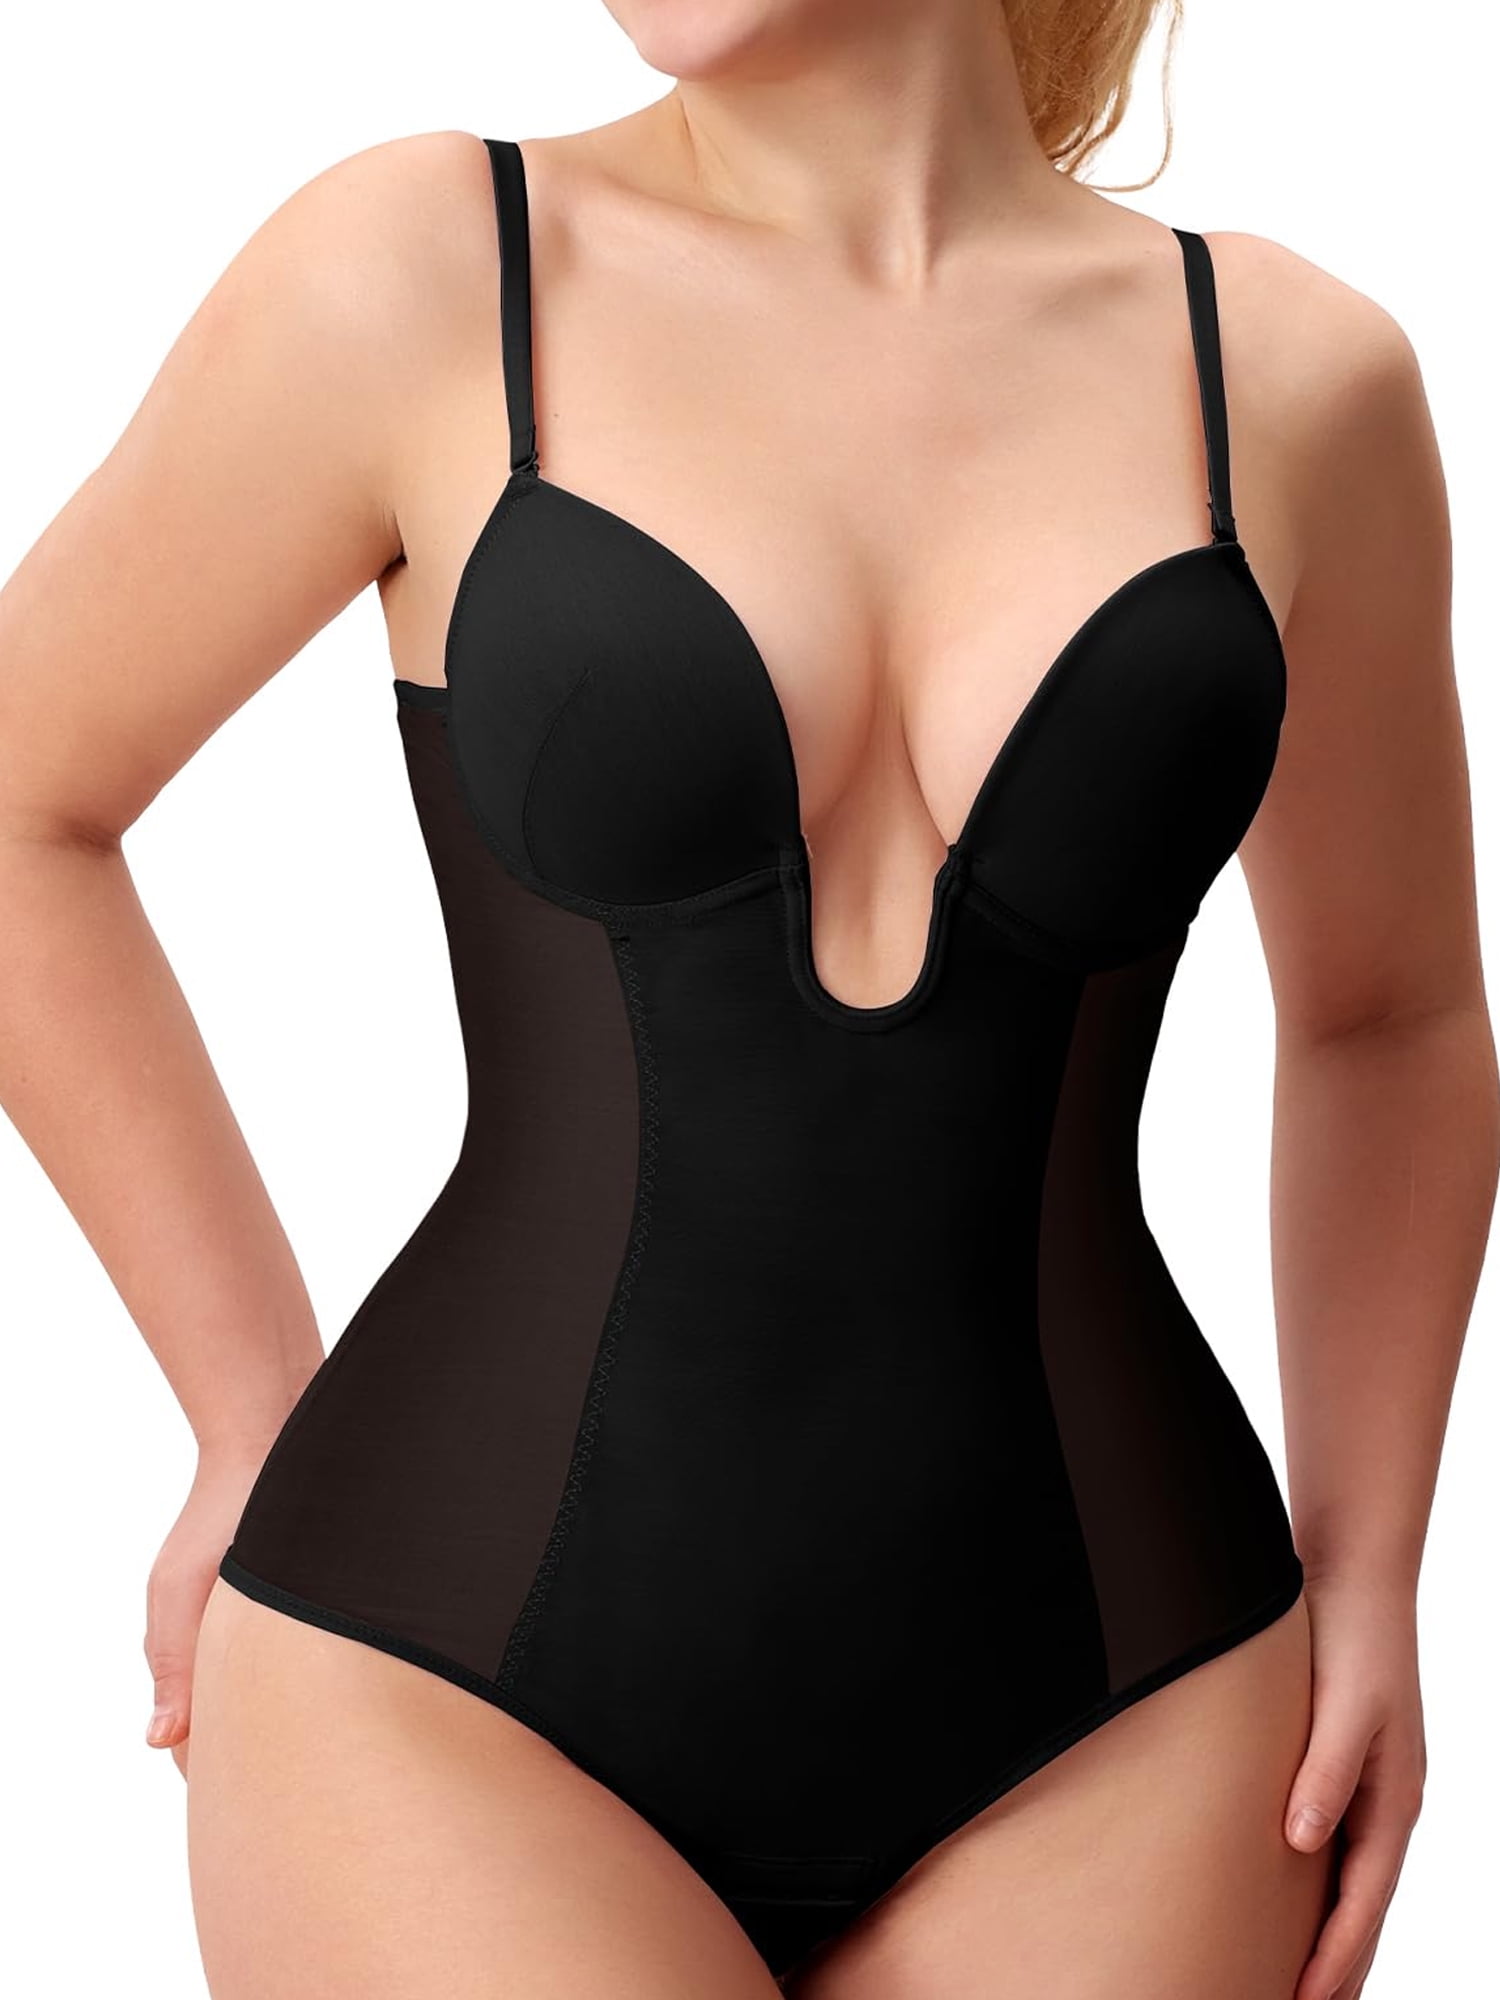 Girdle Faja Premium Fresh & Light Body Suit for women Defines waistline  Brief-bottom Girdle Belly reducer with criss-cross panels Gusset Opening  with Hooks Body Briefer Adjustable Straps Fajas Colom 